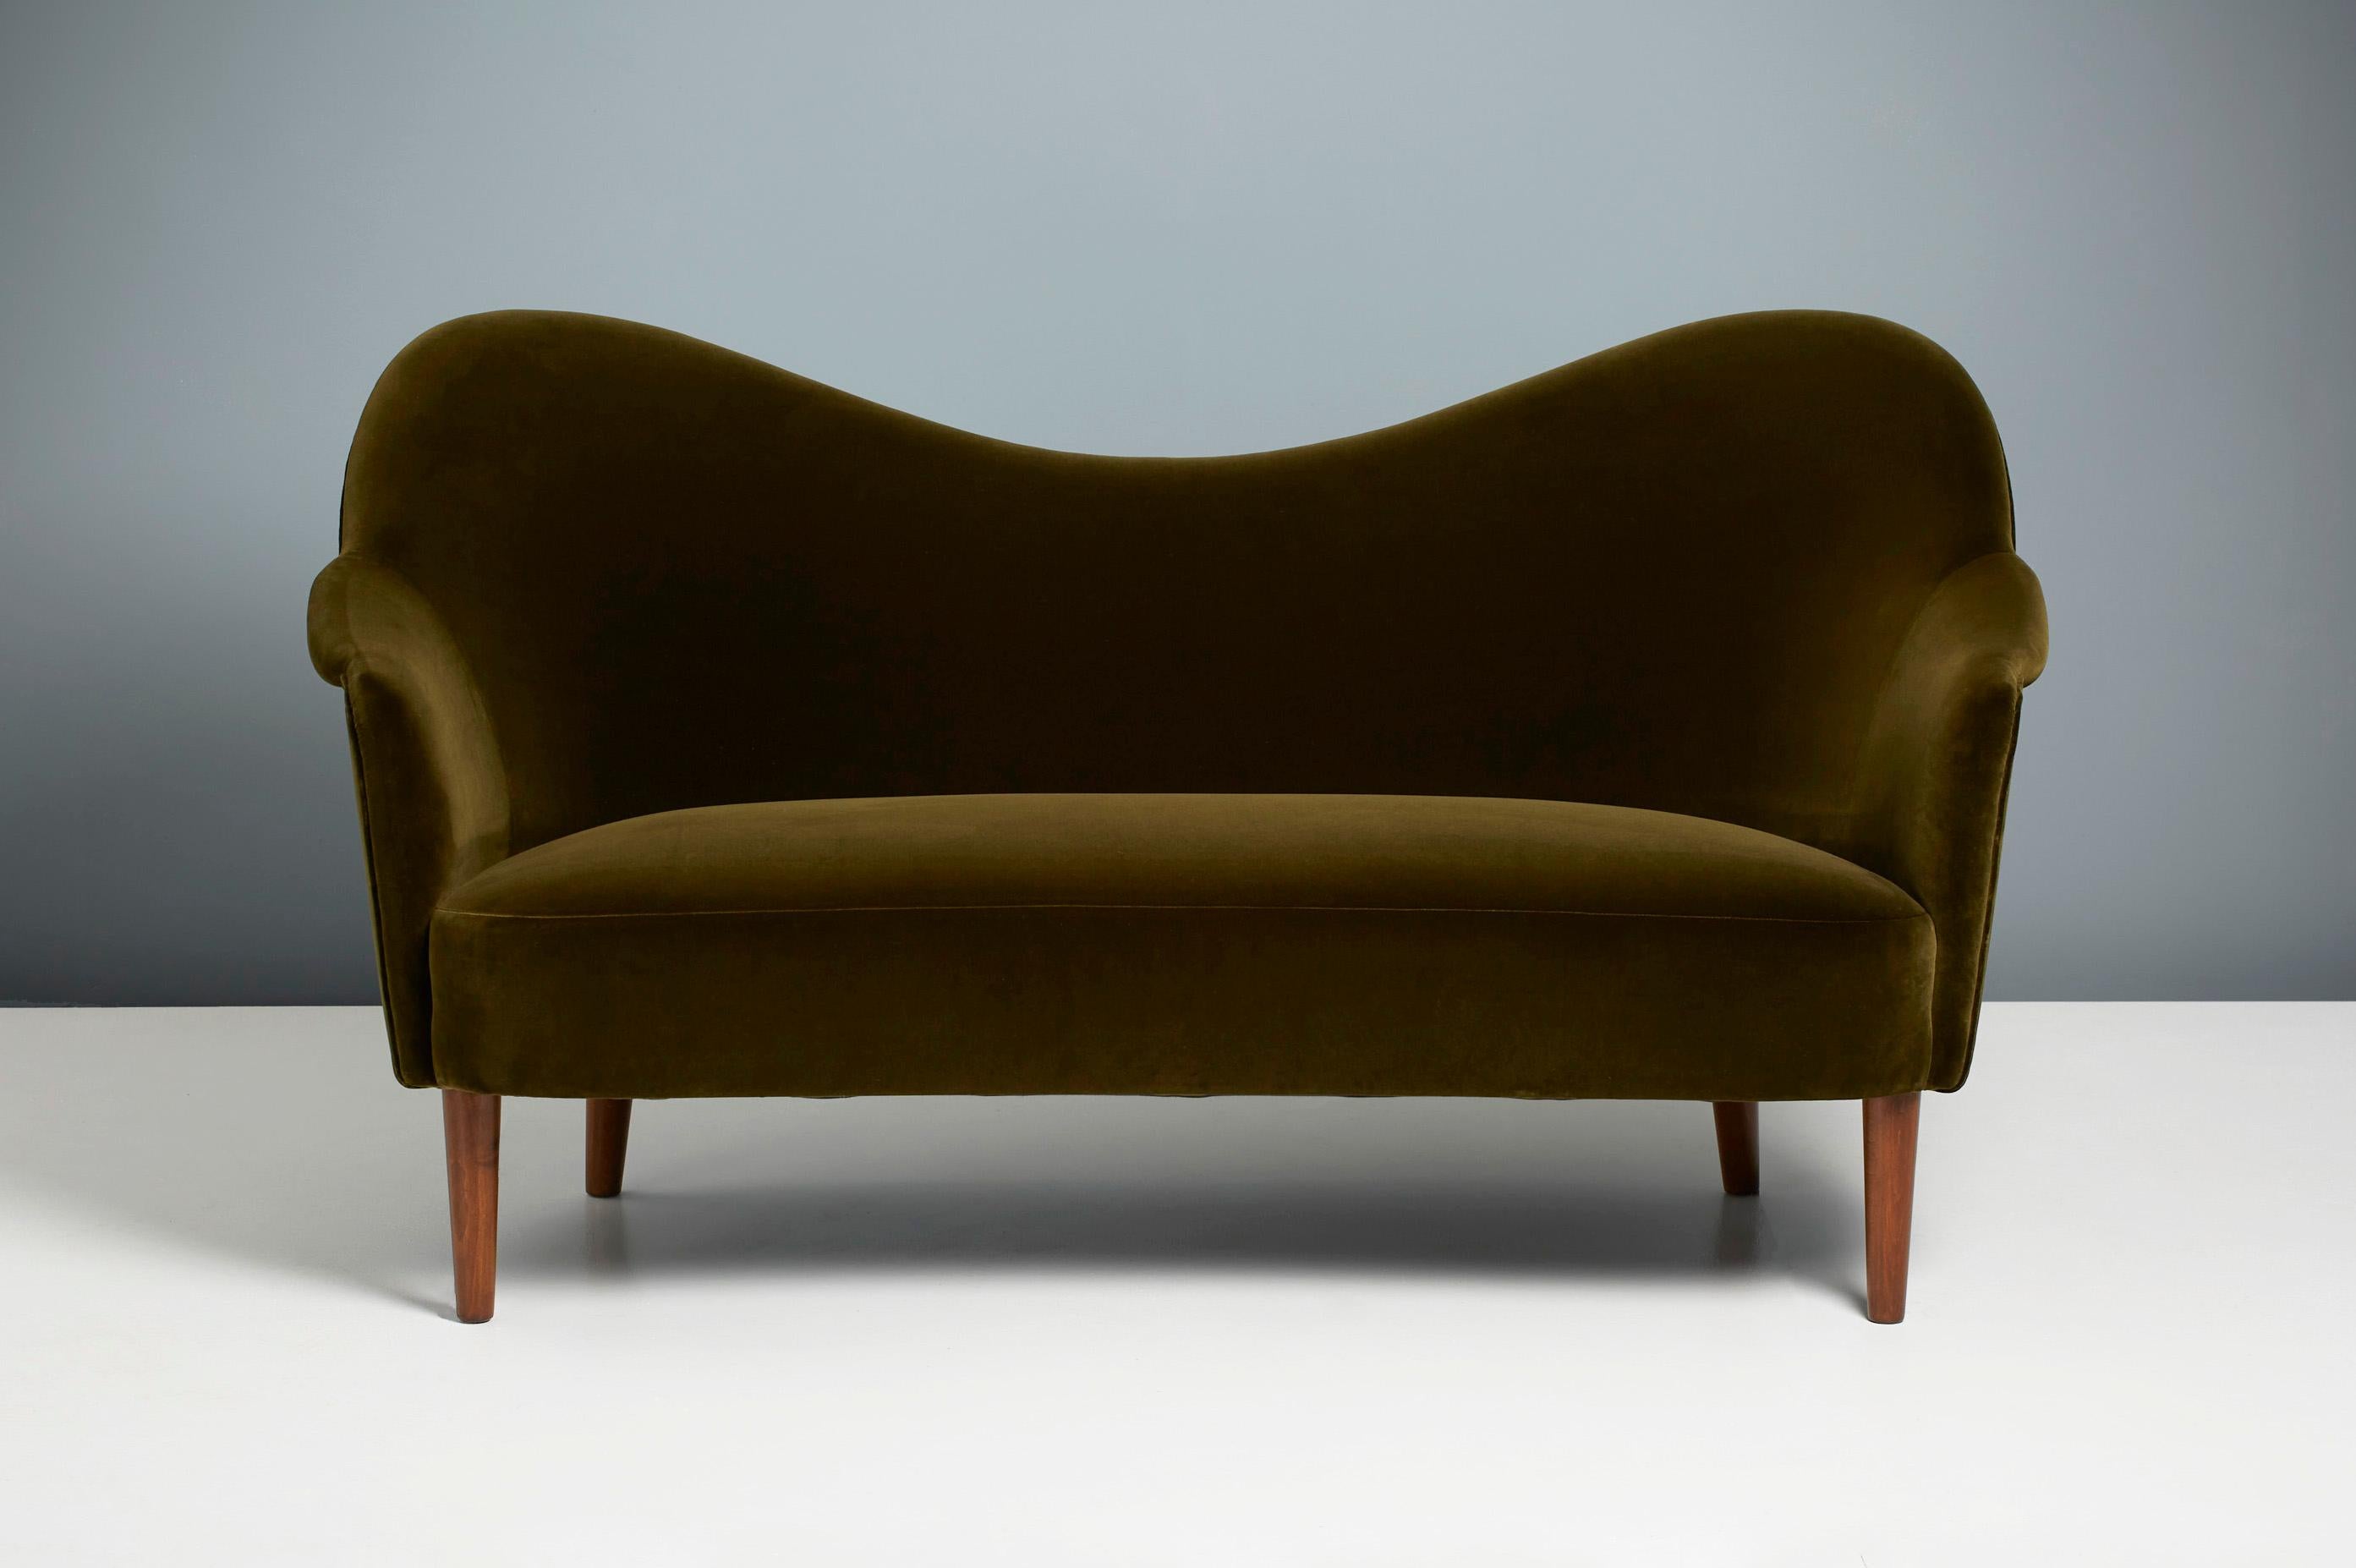 Carl Malmsten 'Samspel' Sofa, circa 1950s

First designed in 1956 and produced by AB Record in Bollnas, Sweden, the 'Samspel' sofa is one of the finest pieces to be drawn by Sweden's design icon of the 20th century: Carl Malmsten.

In the same